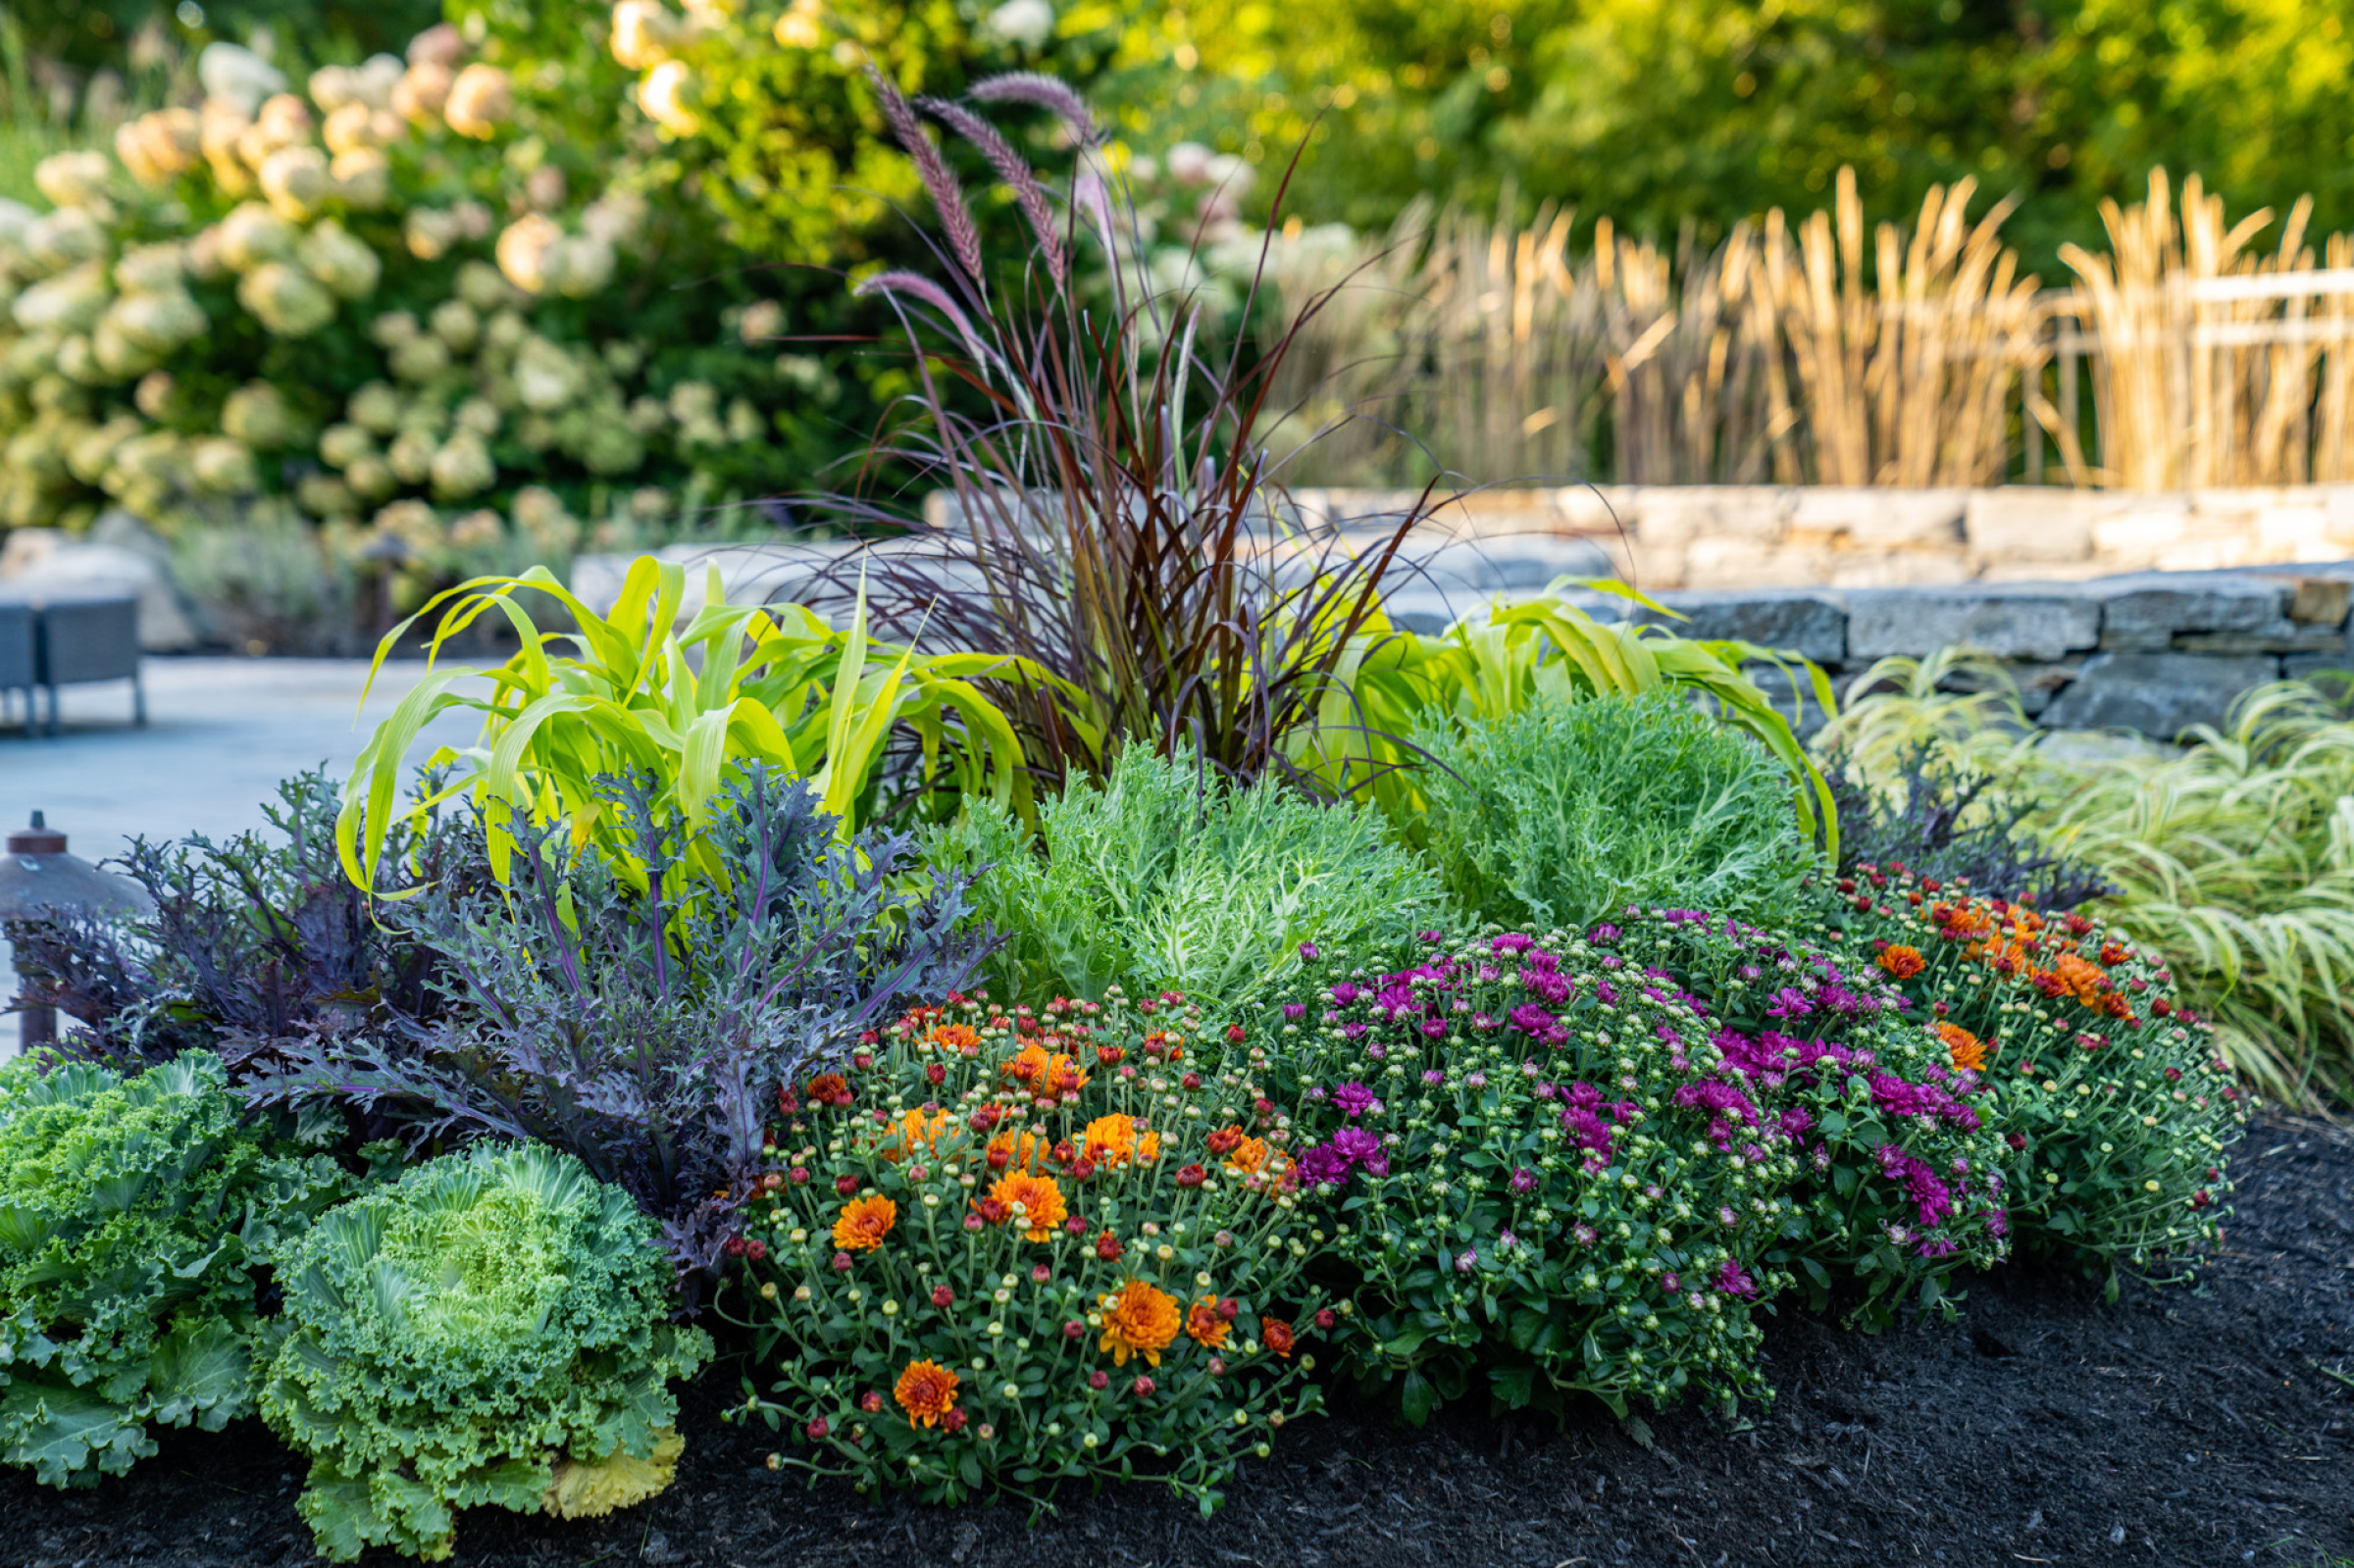 Why You Should Invest in Professional Landscape Design